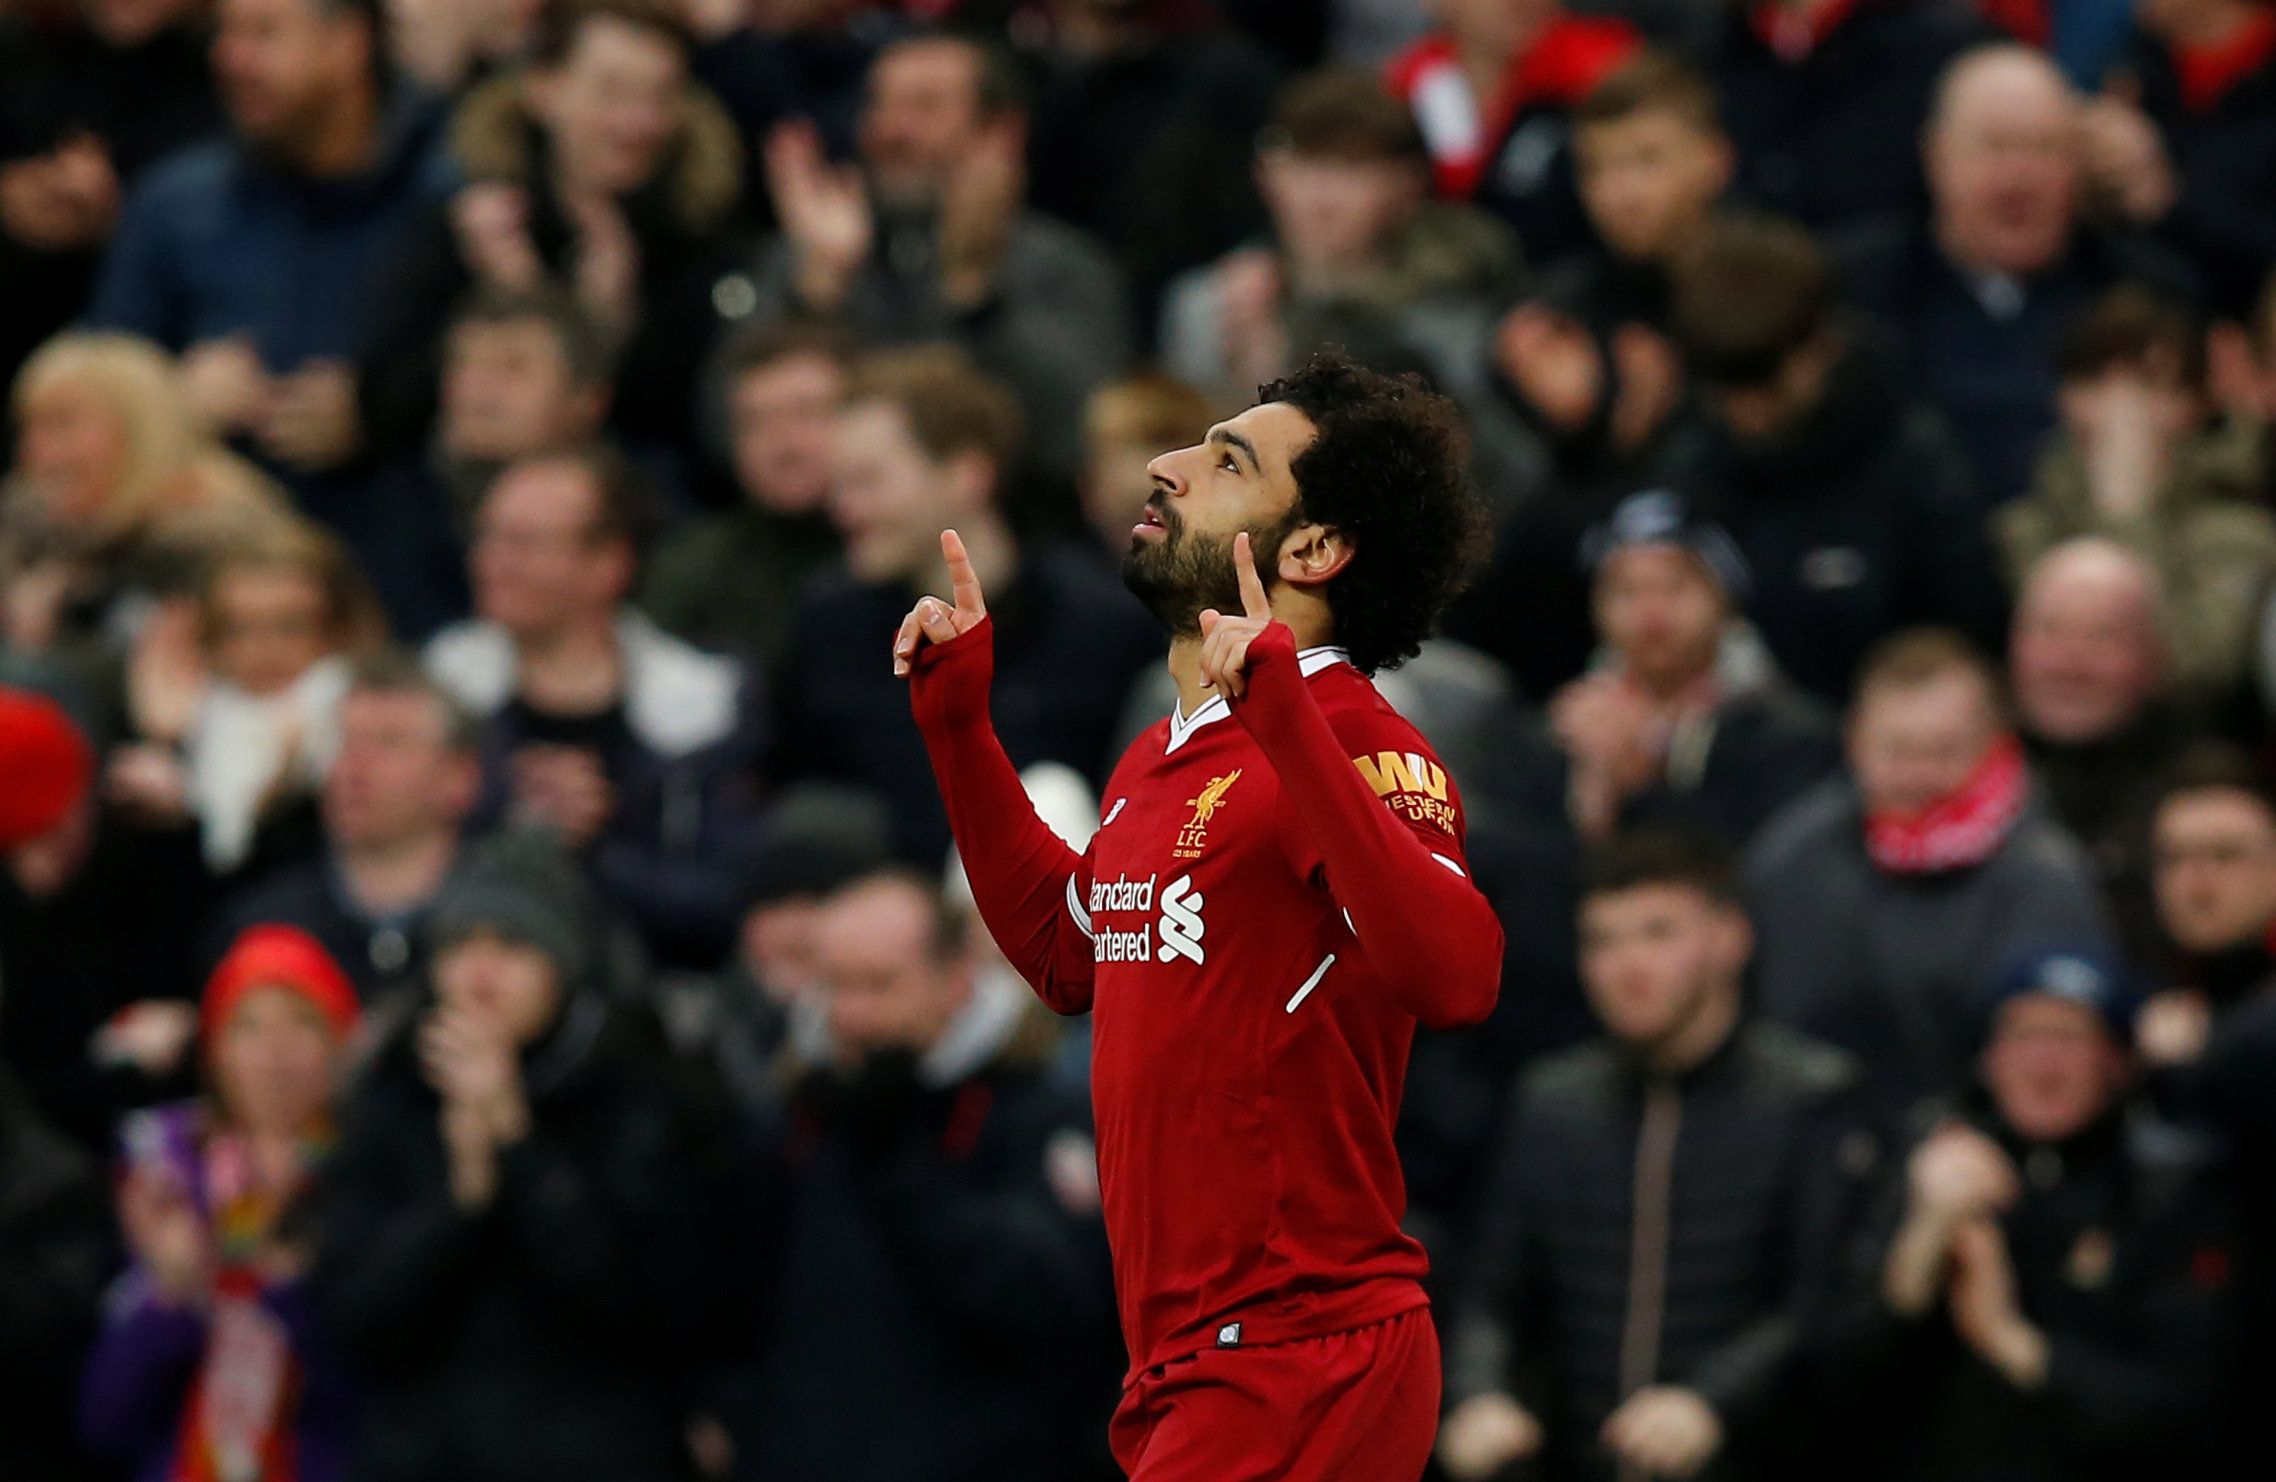 Soccer Football - Premier League - Liverpool vs Tottenham Hotspur - Anfield, Liverpool, Britain - February 4, 2018   Liverpool's Mohamed Salah celebrates scoring their first goal     REUTERS/Andrew Yates    EDITORIAL USE ONLY. No use with unauthorized audio, video, data, fixture lists, club/league logos or 